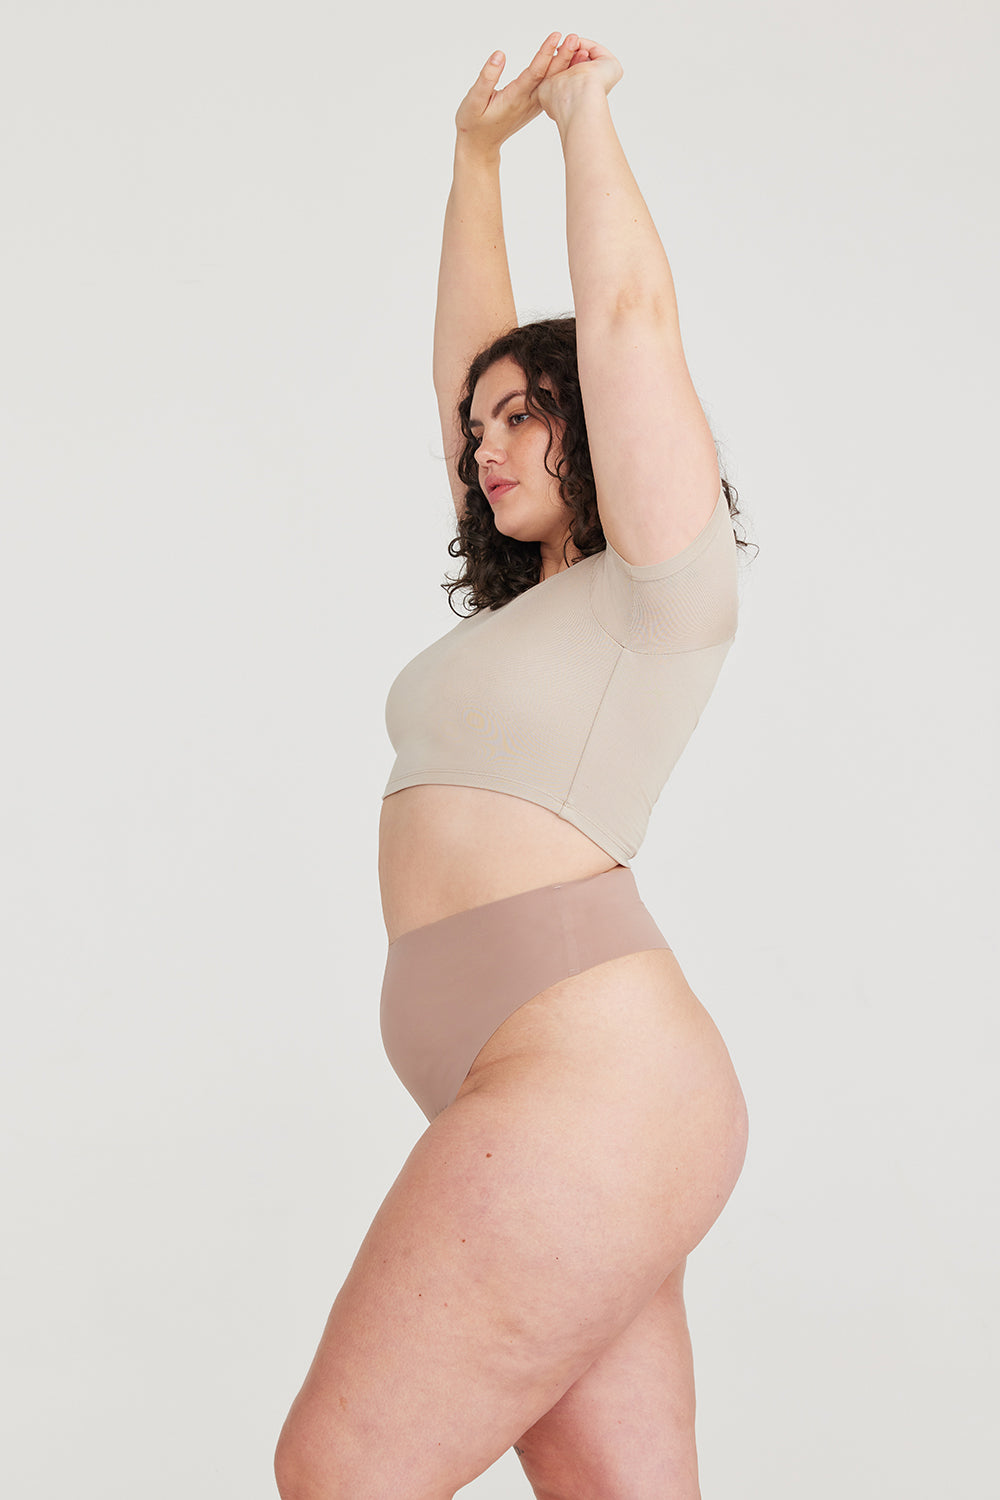 Subset Organic Cotton High-Rise Thong: Available in sizes 2XS-4XL